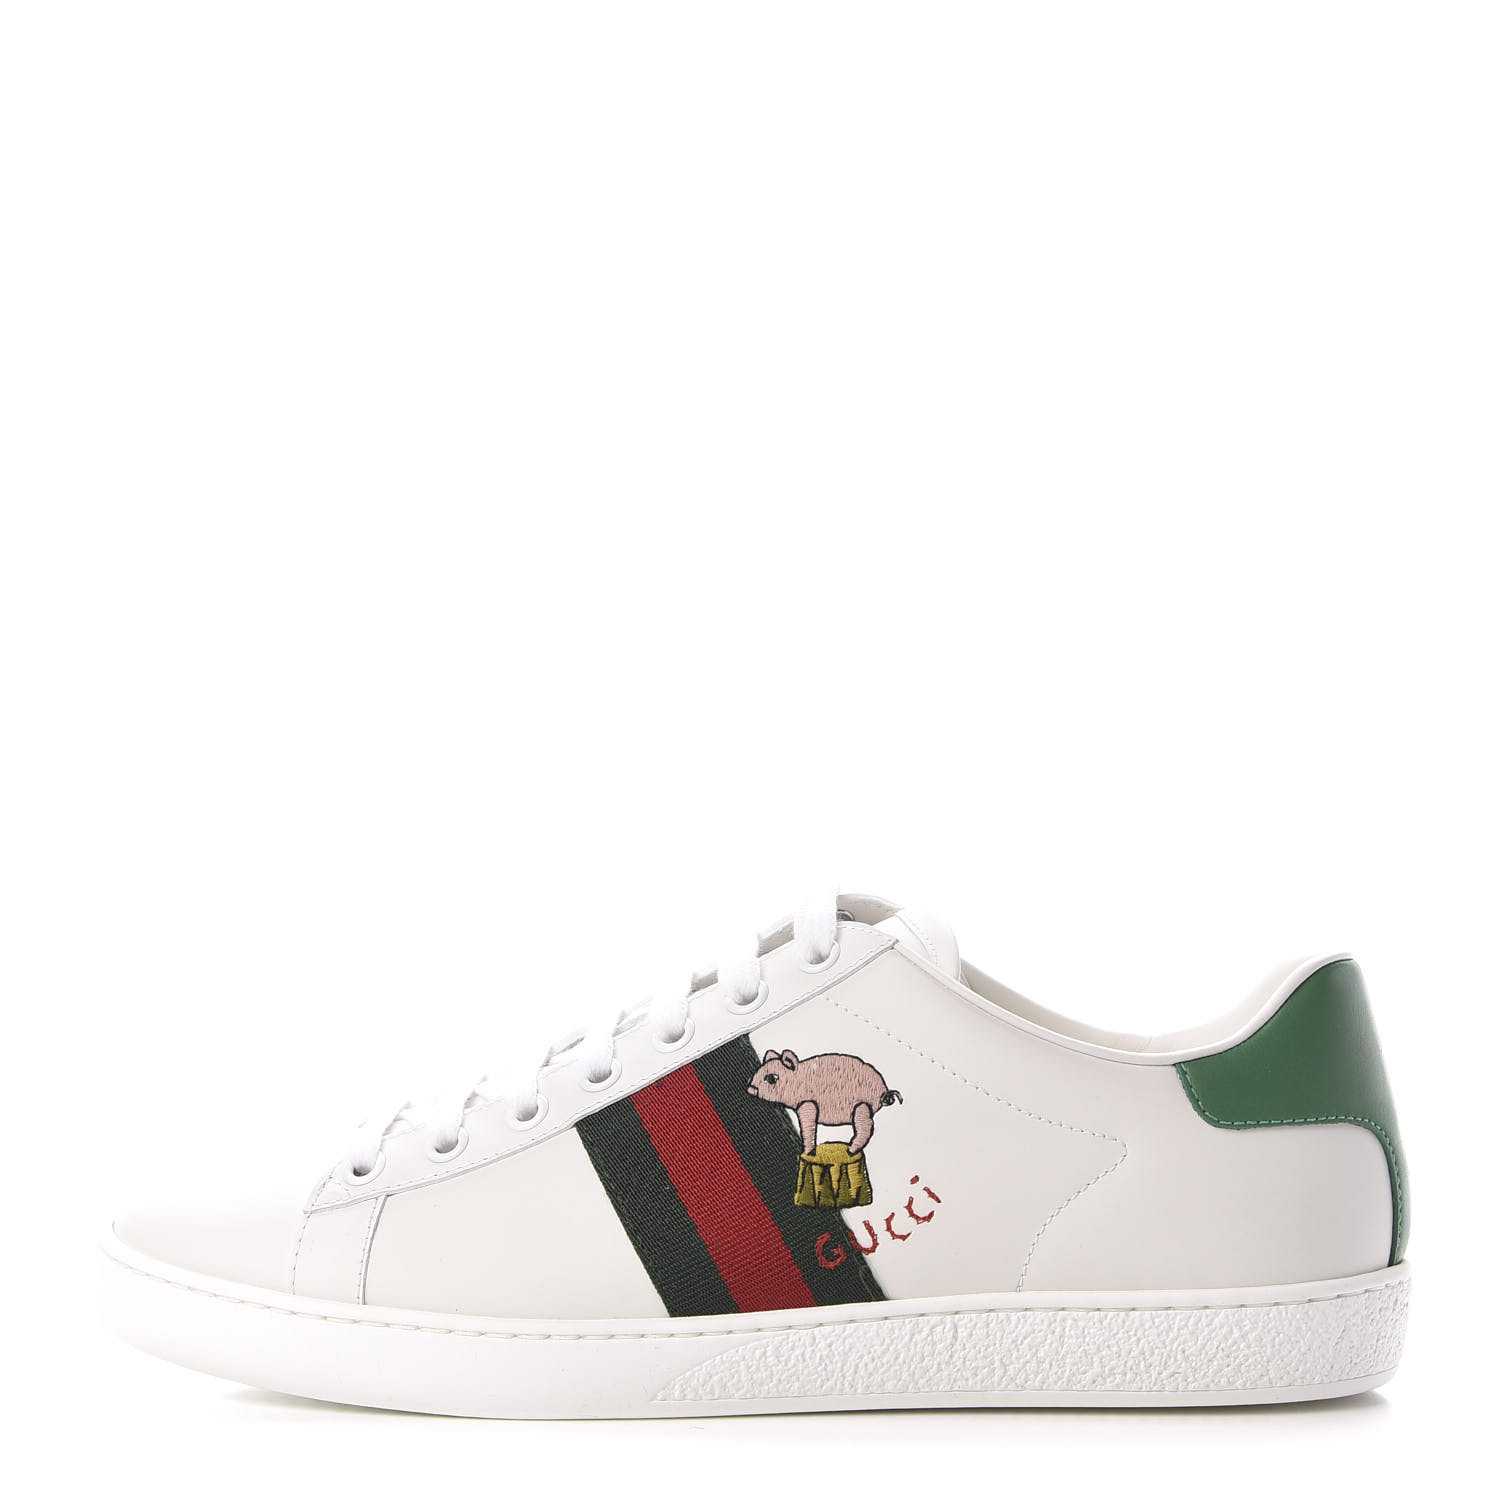 GUCCI Ayers Embroidered Women's Ace Kitten Pig Sneakers 39 White 674350 ...